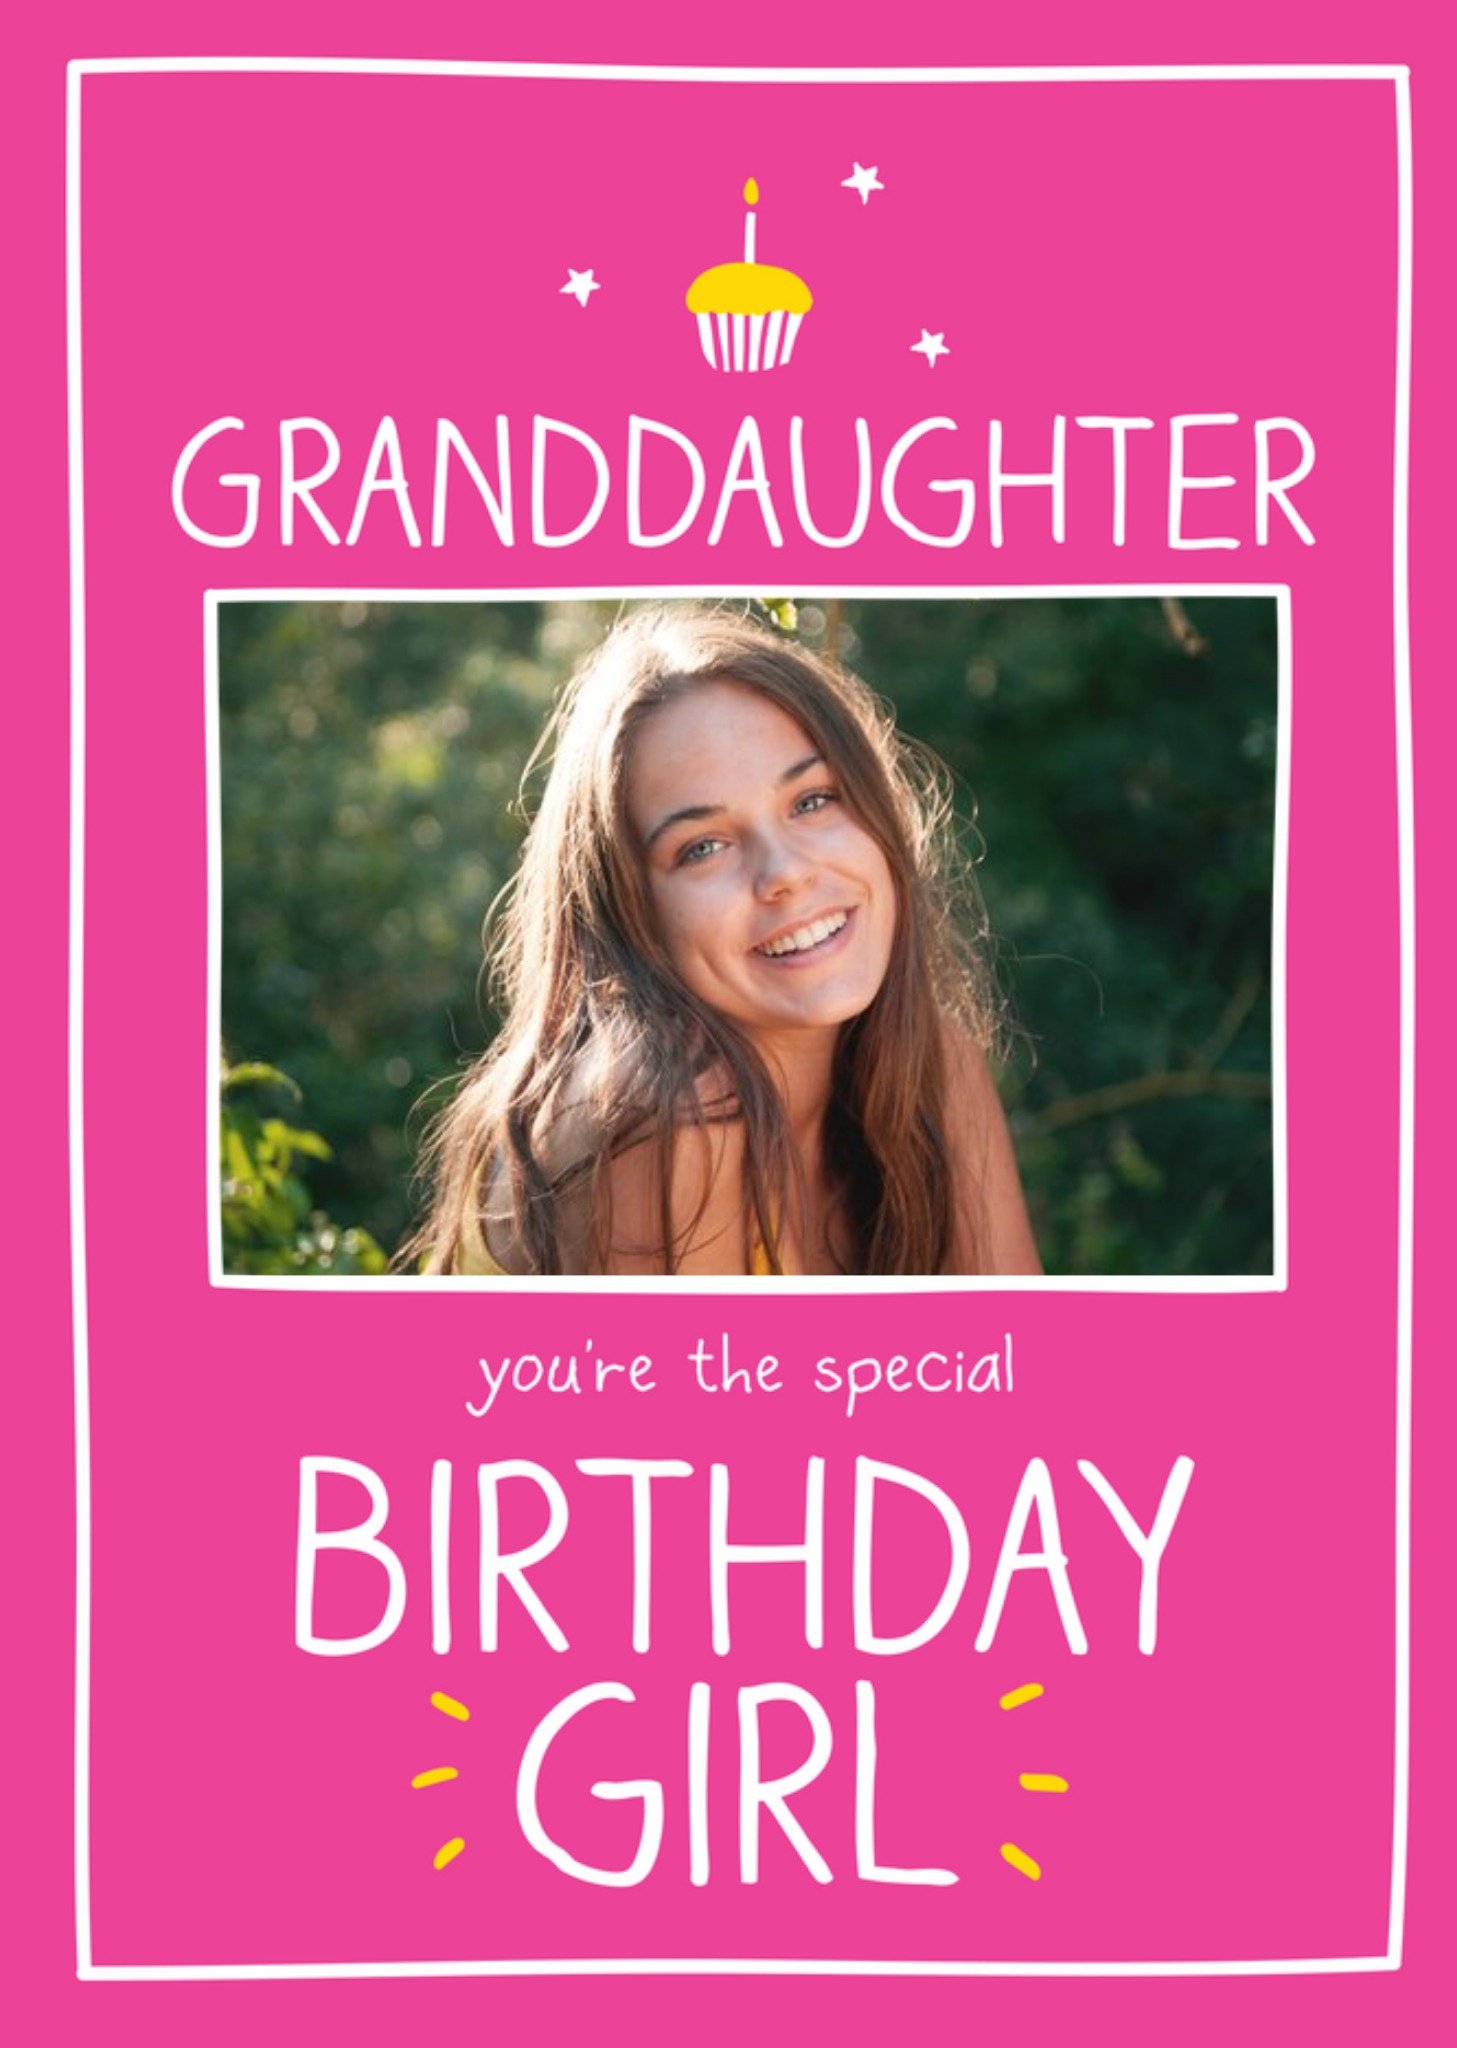 Happy Jackson Granddaughter You're The Special Birthday Girl Photo Card, Large